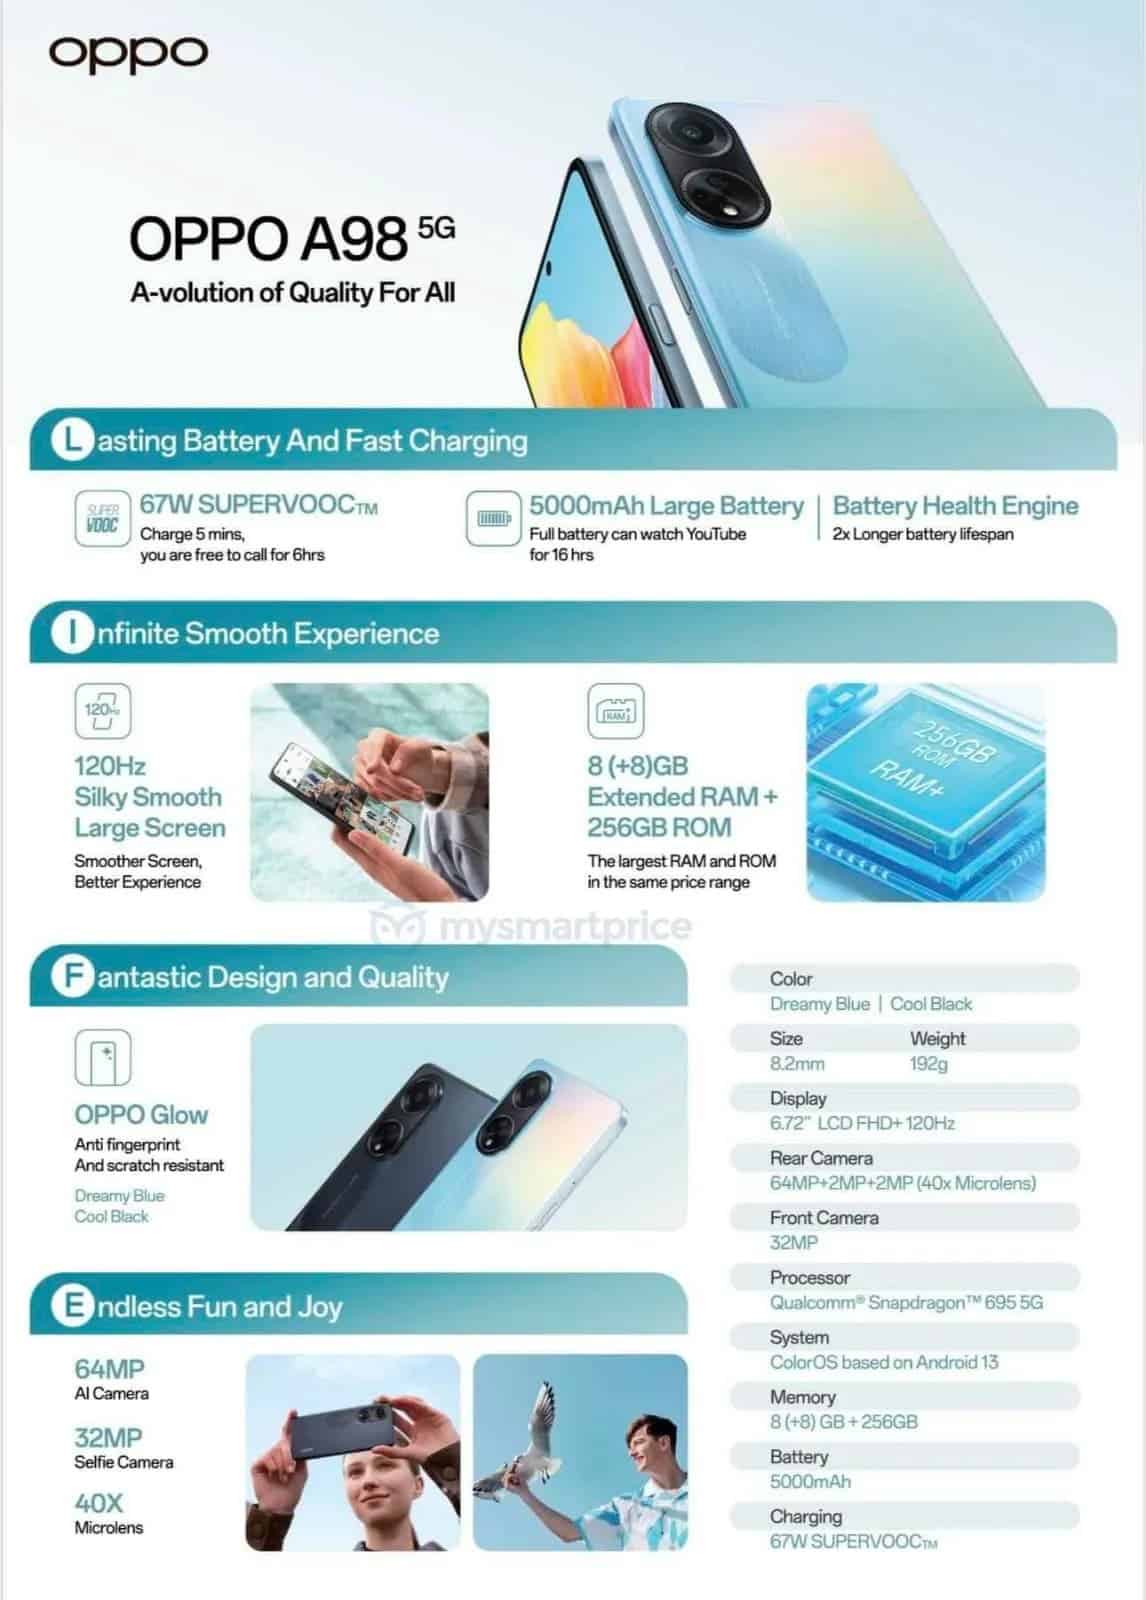 New information about OPPO A98 5G 